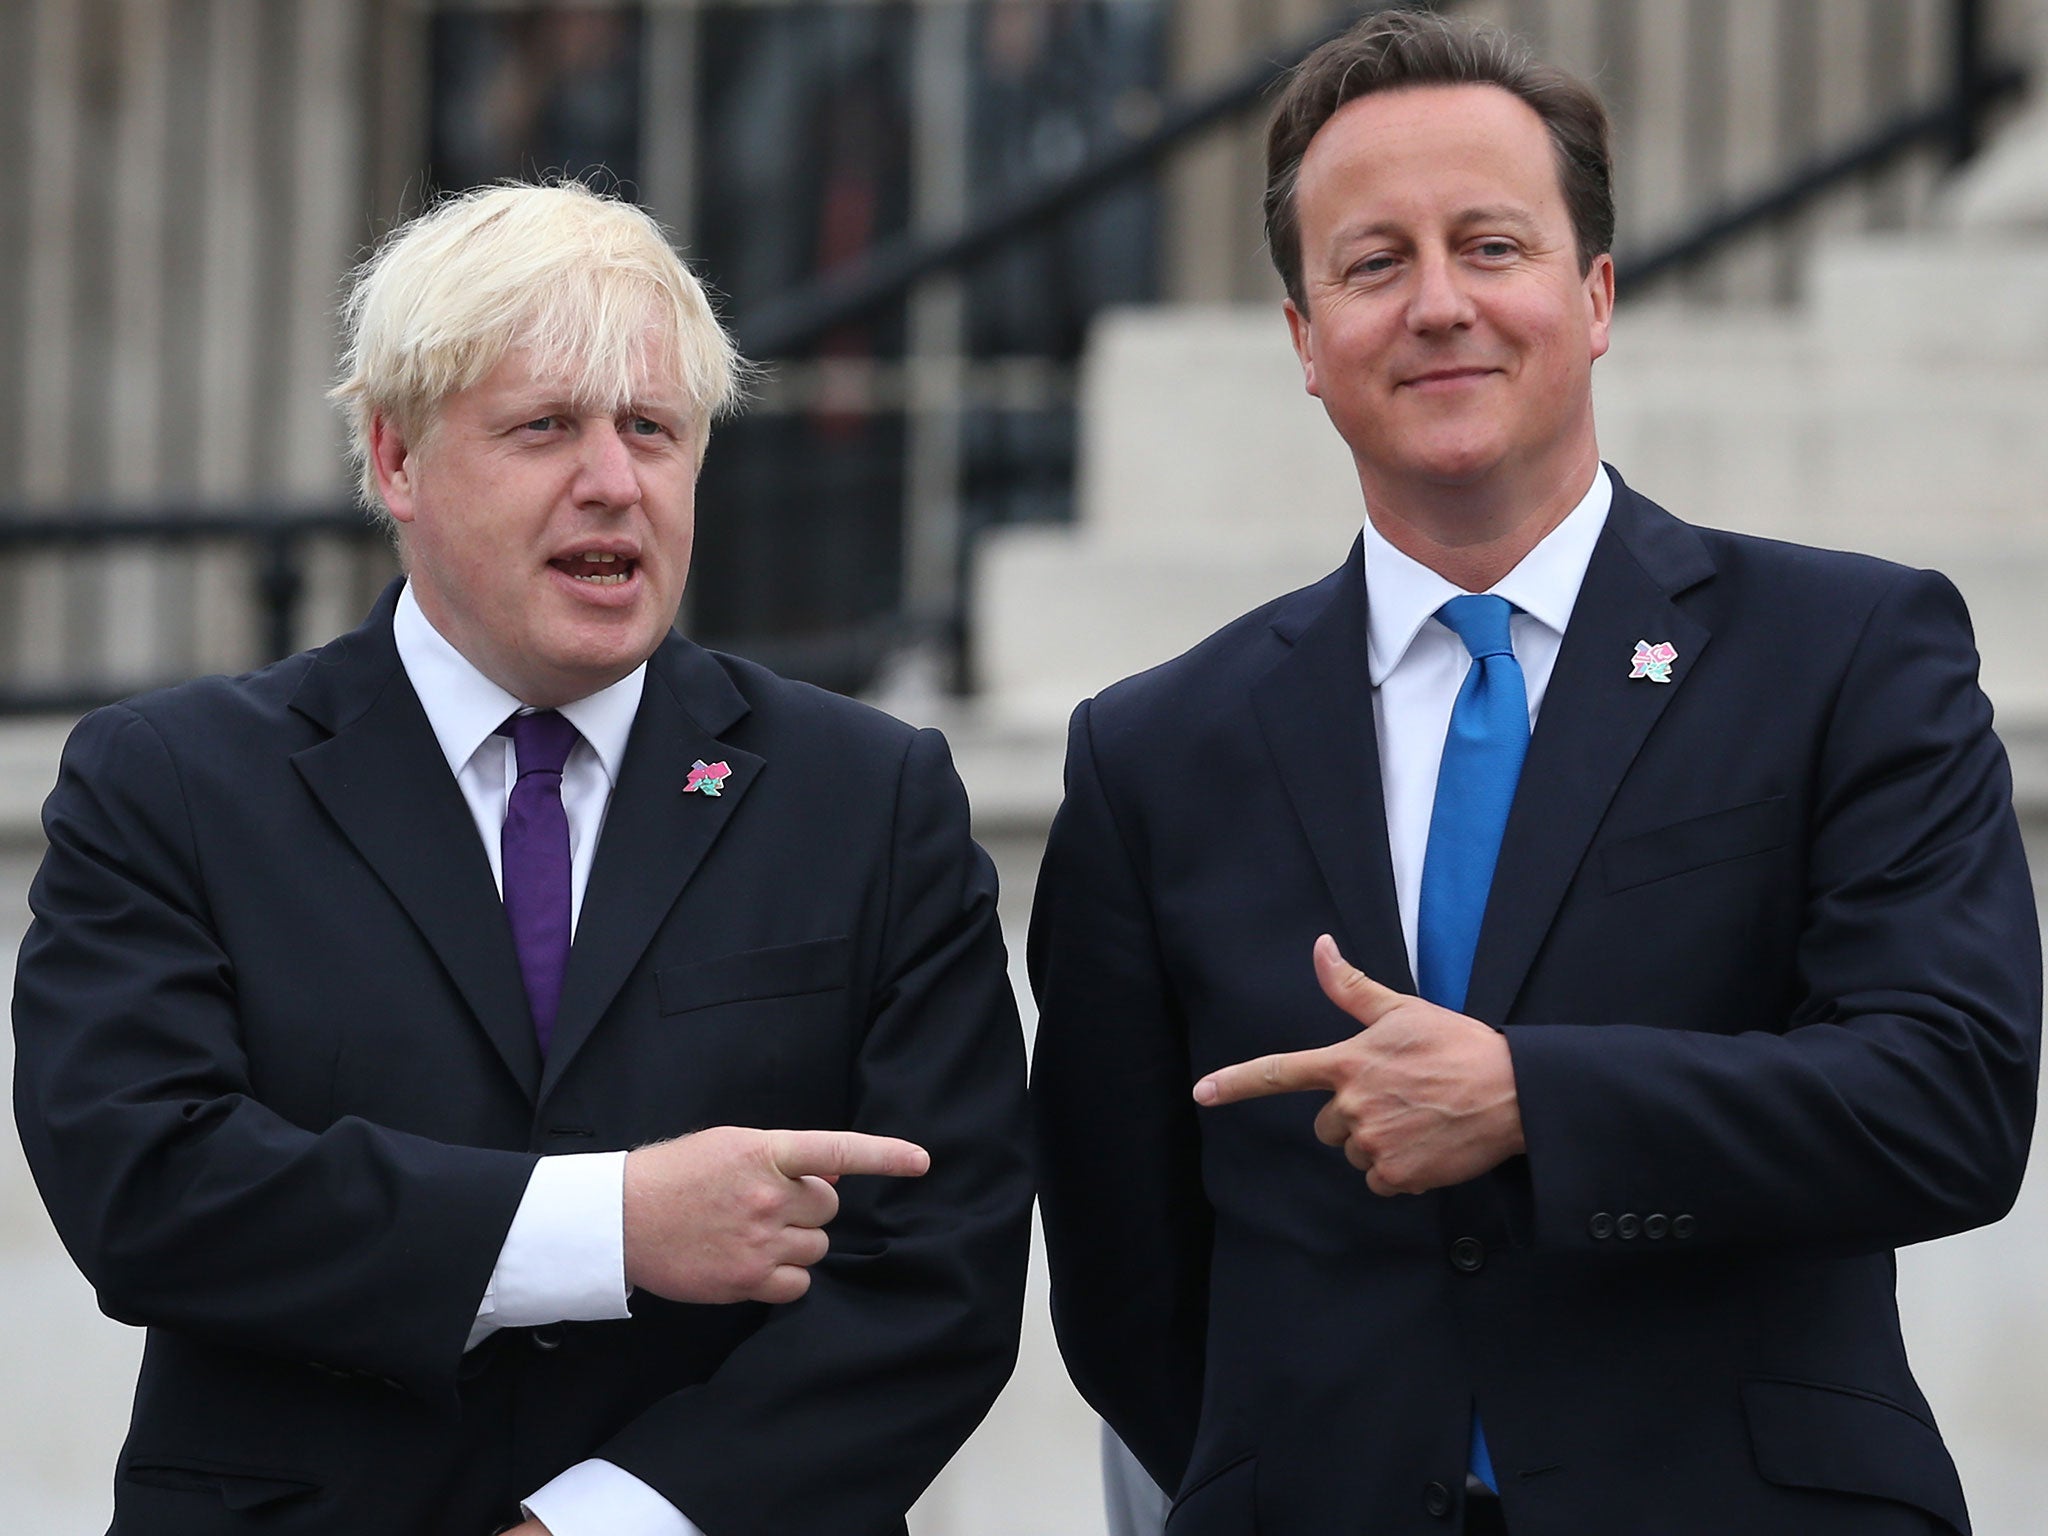 Boris Johnson and David Cameron, the leading figures in the Leave and Remain camps.